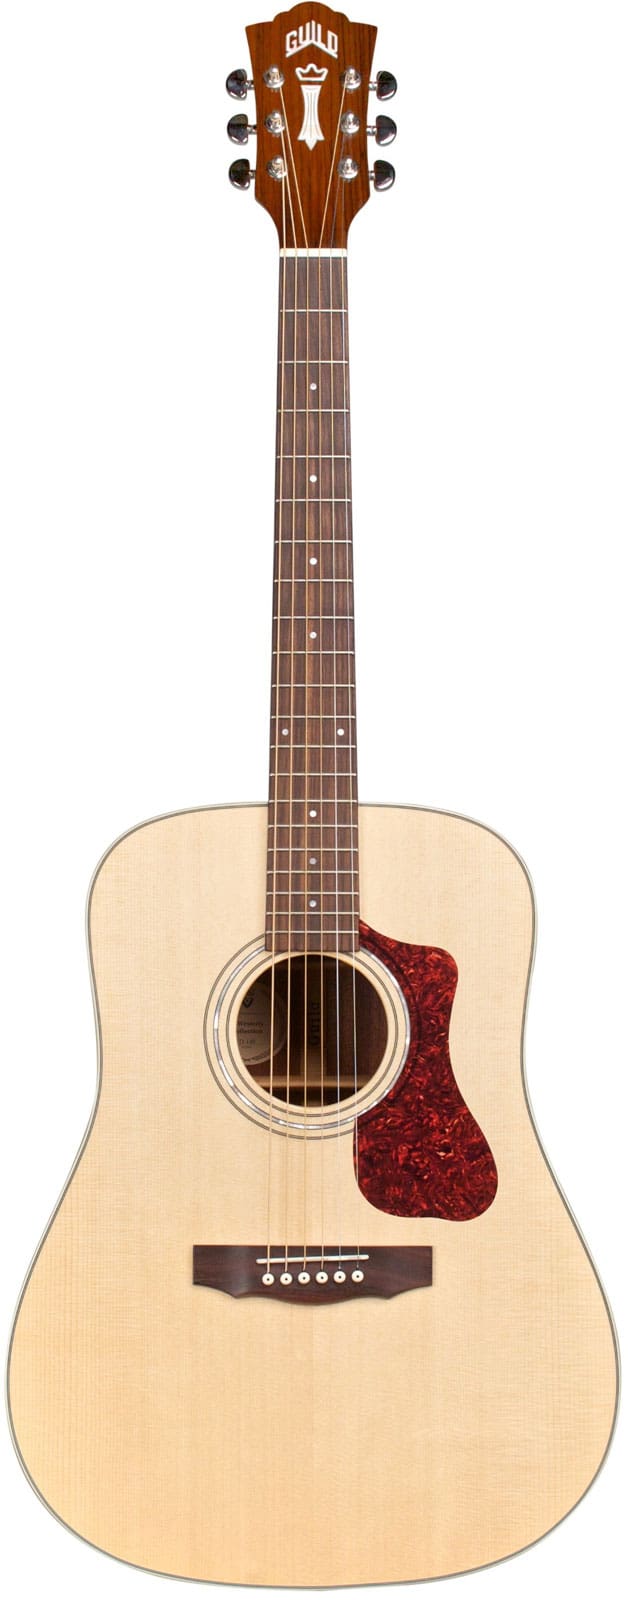 GUILD WESTERLY D-140 NATURAL